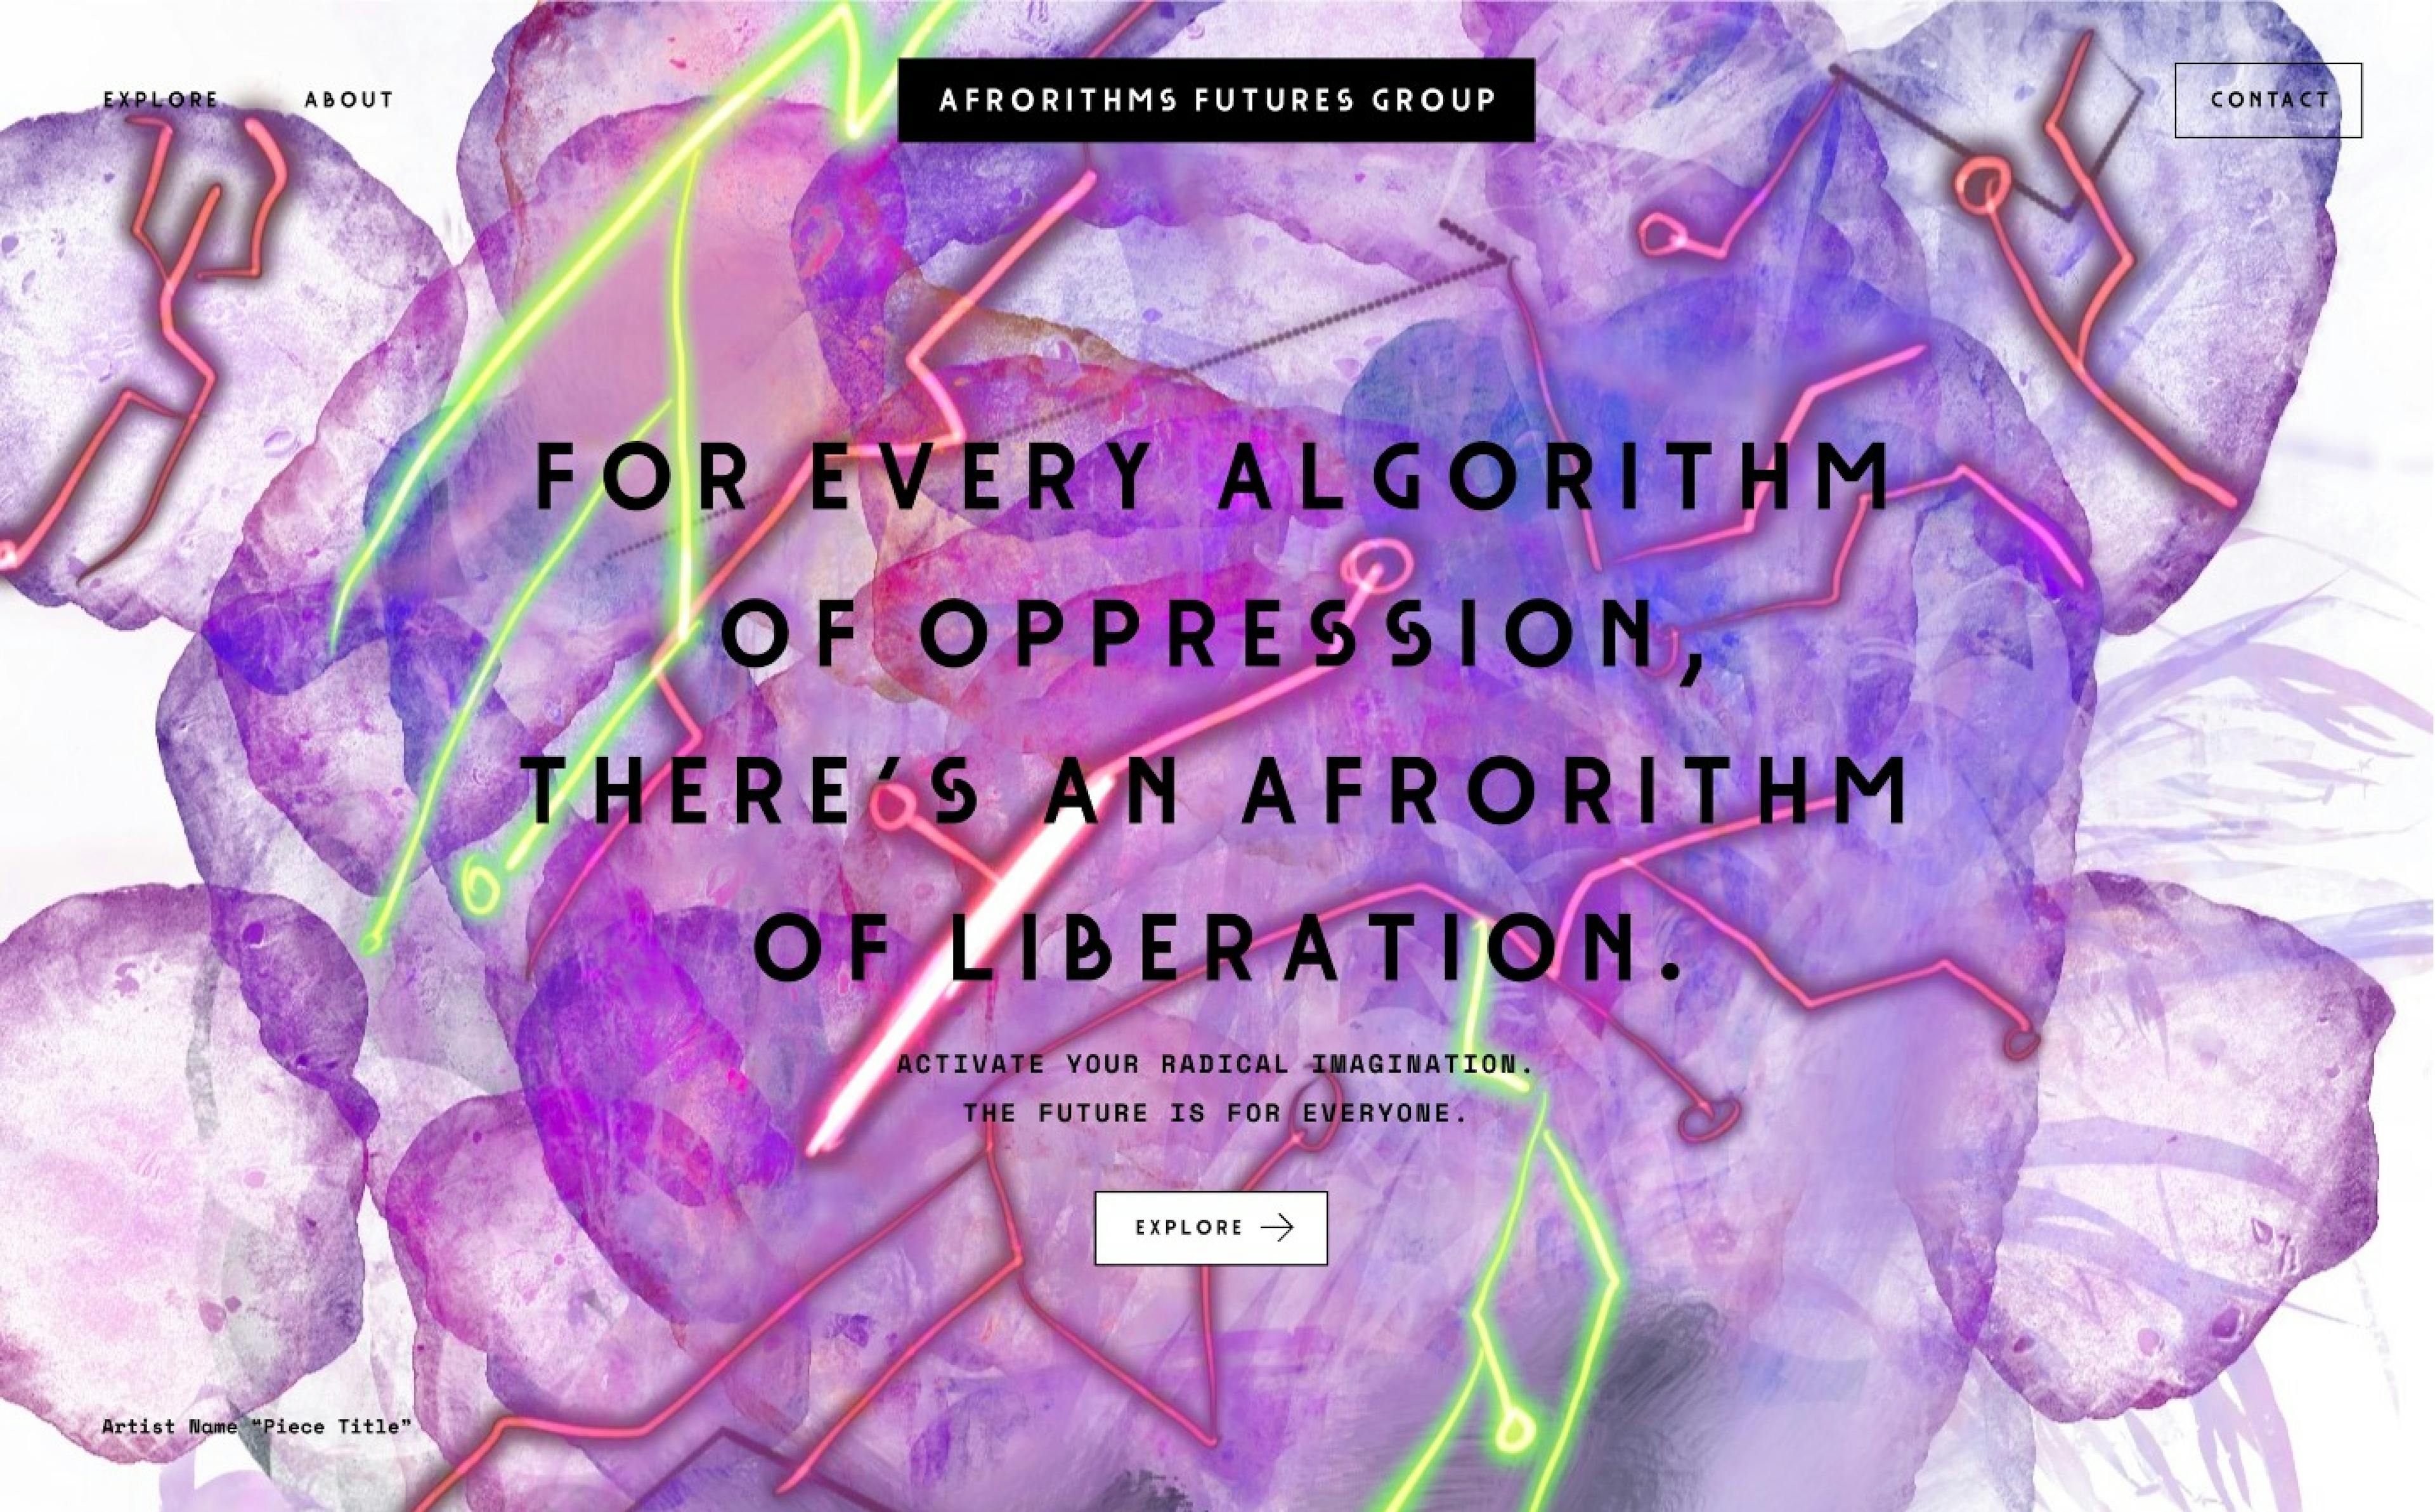 The homepage of the Afrorithms Futures Group website featuring abstract shapes.